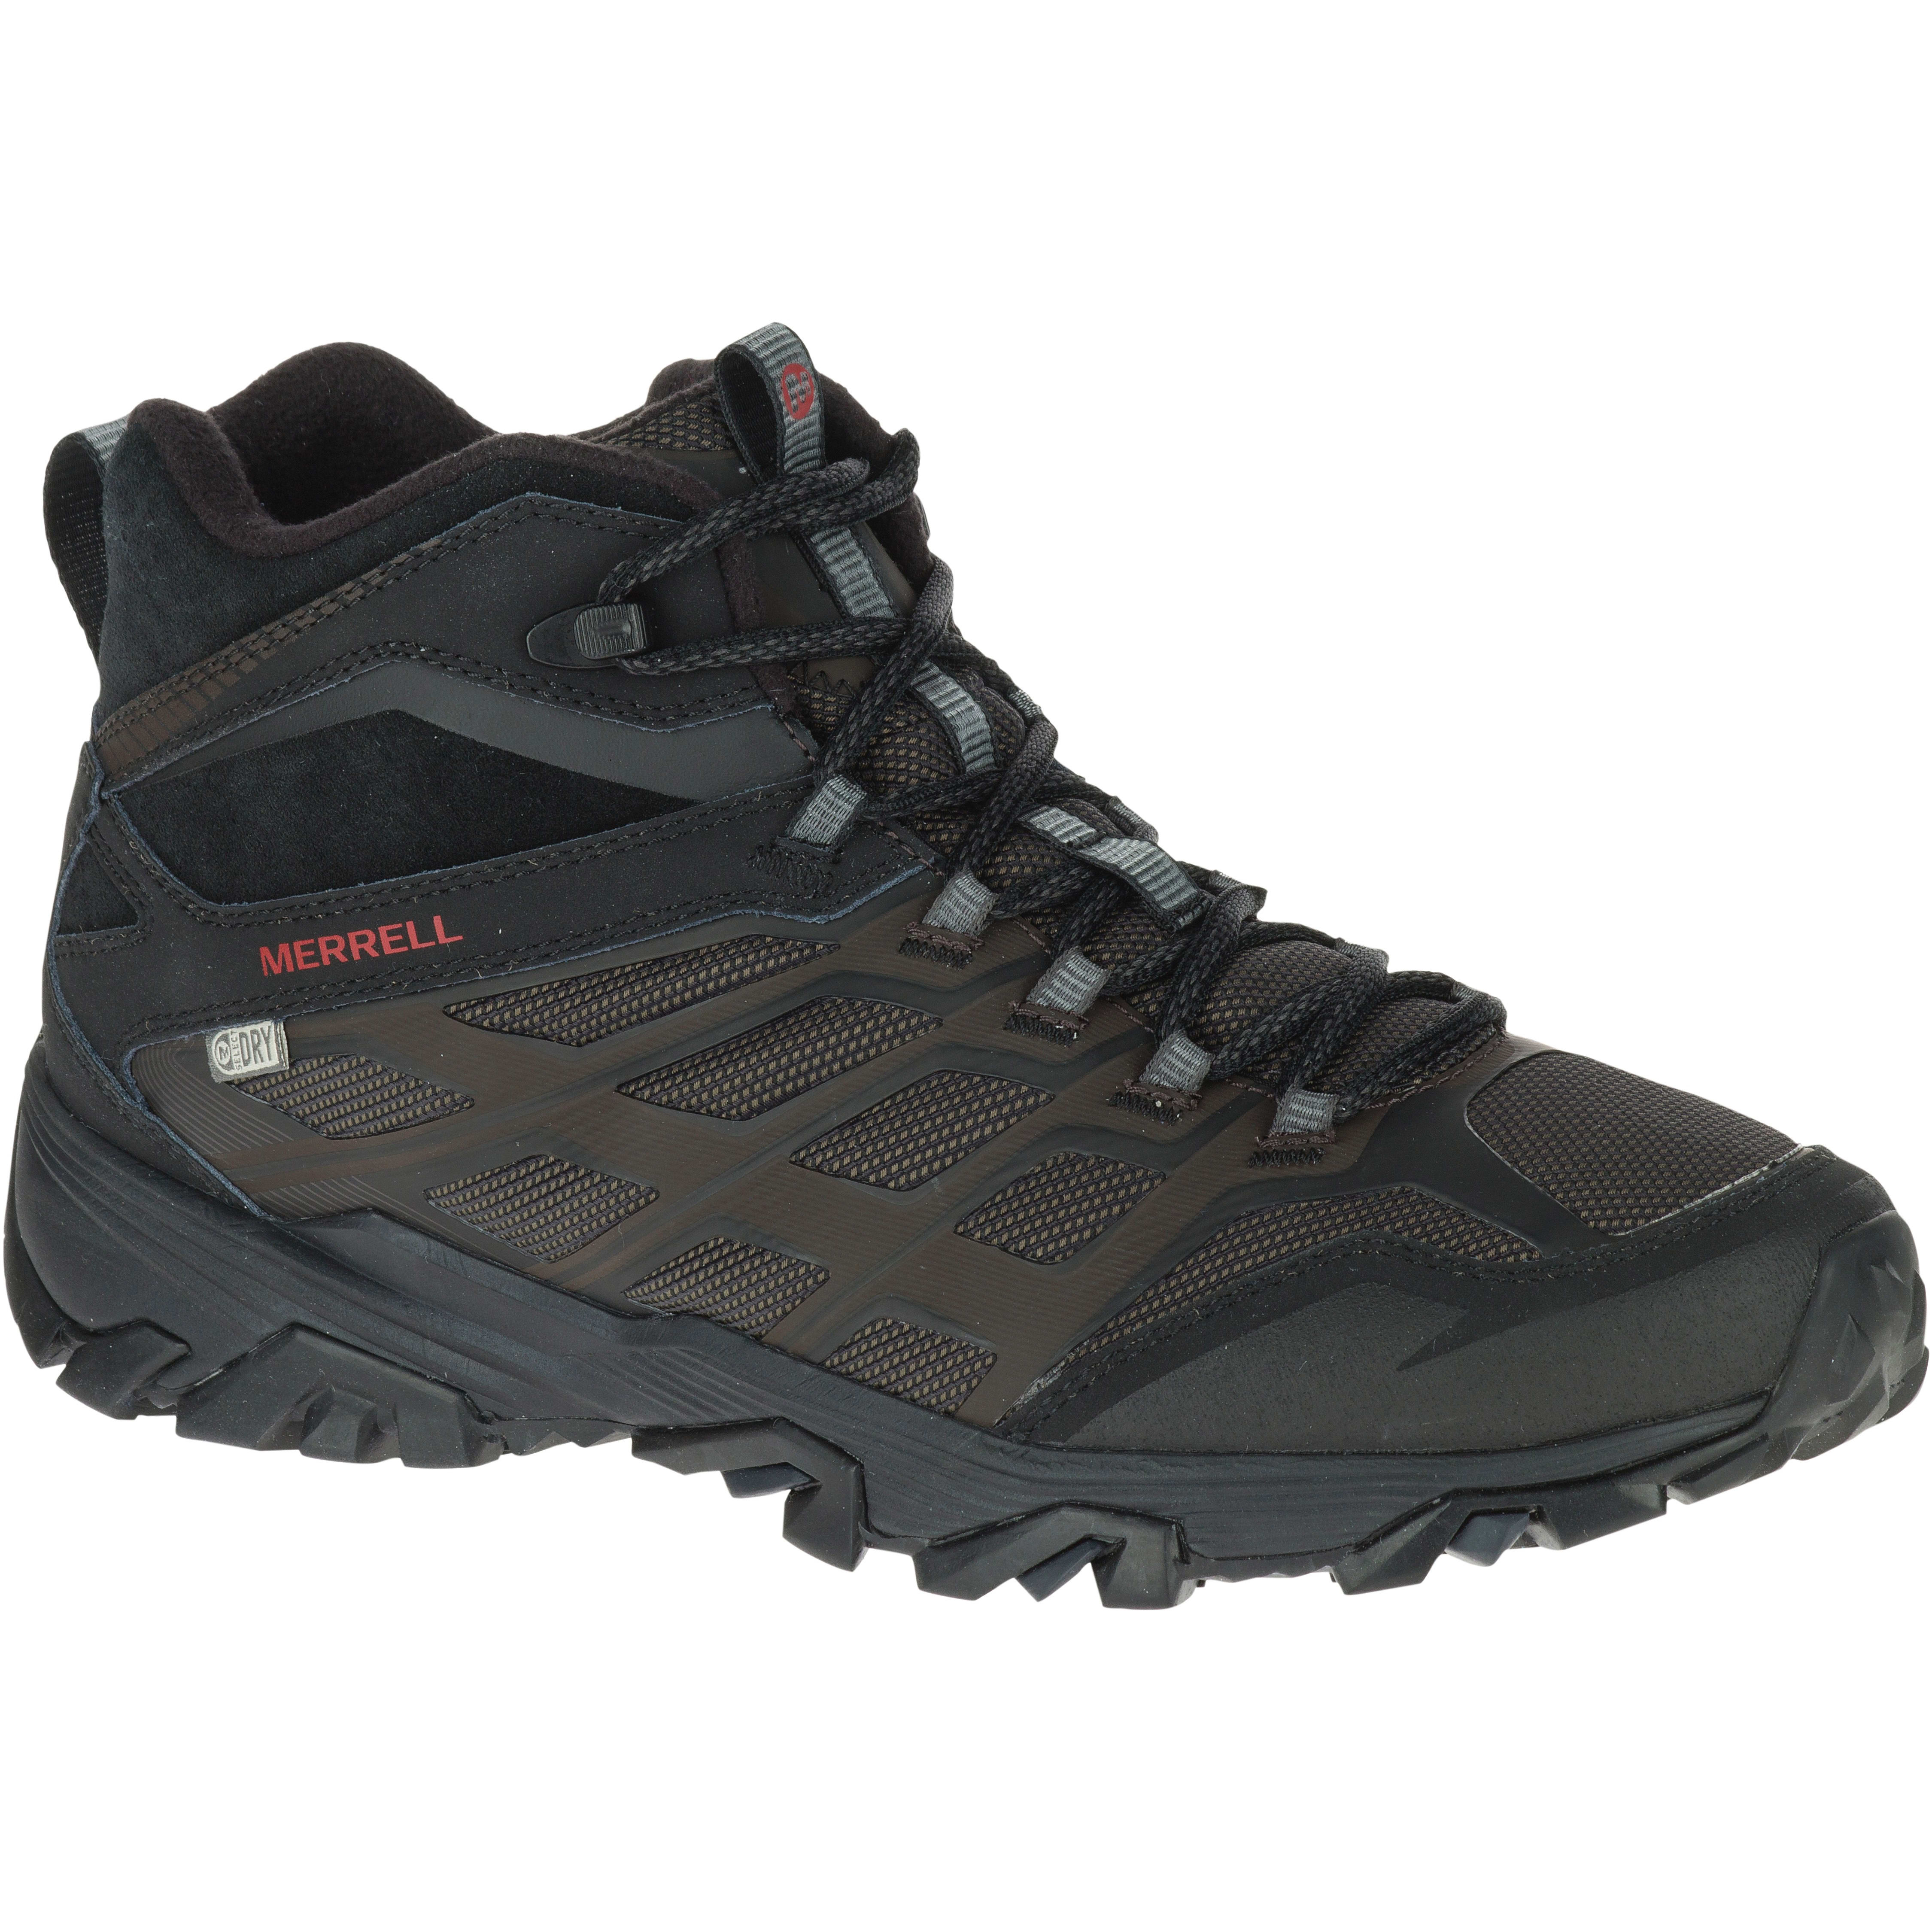 Buy Merrell Men's Moab Fst Ice+ Thermo 